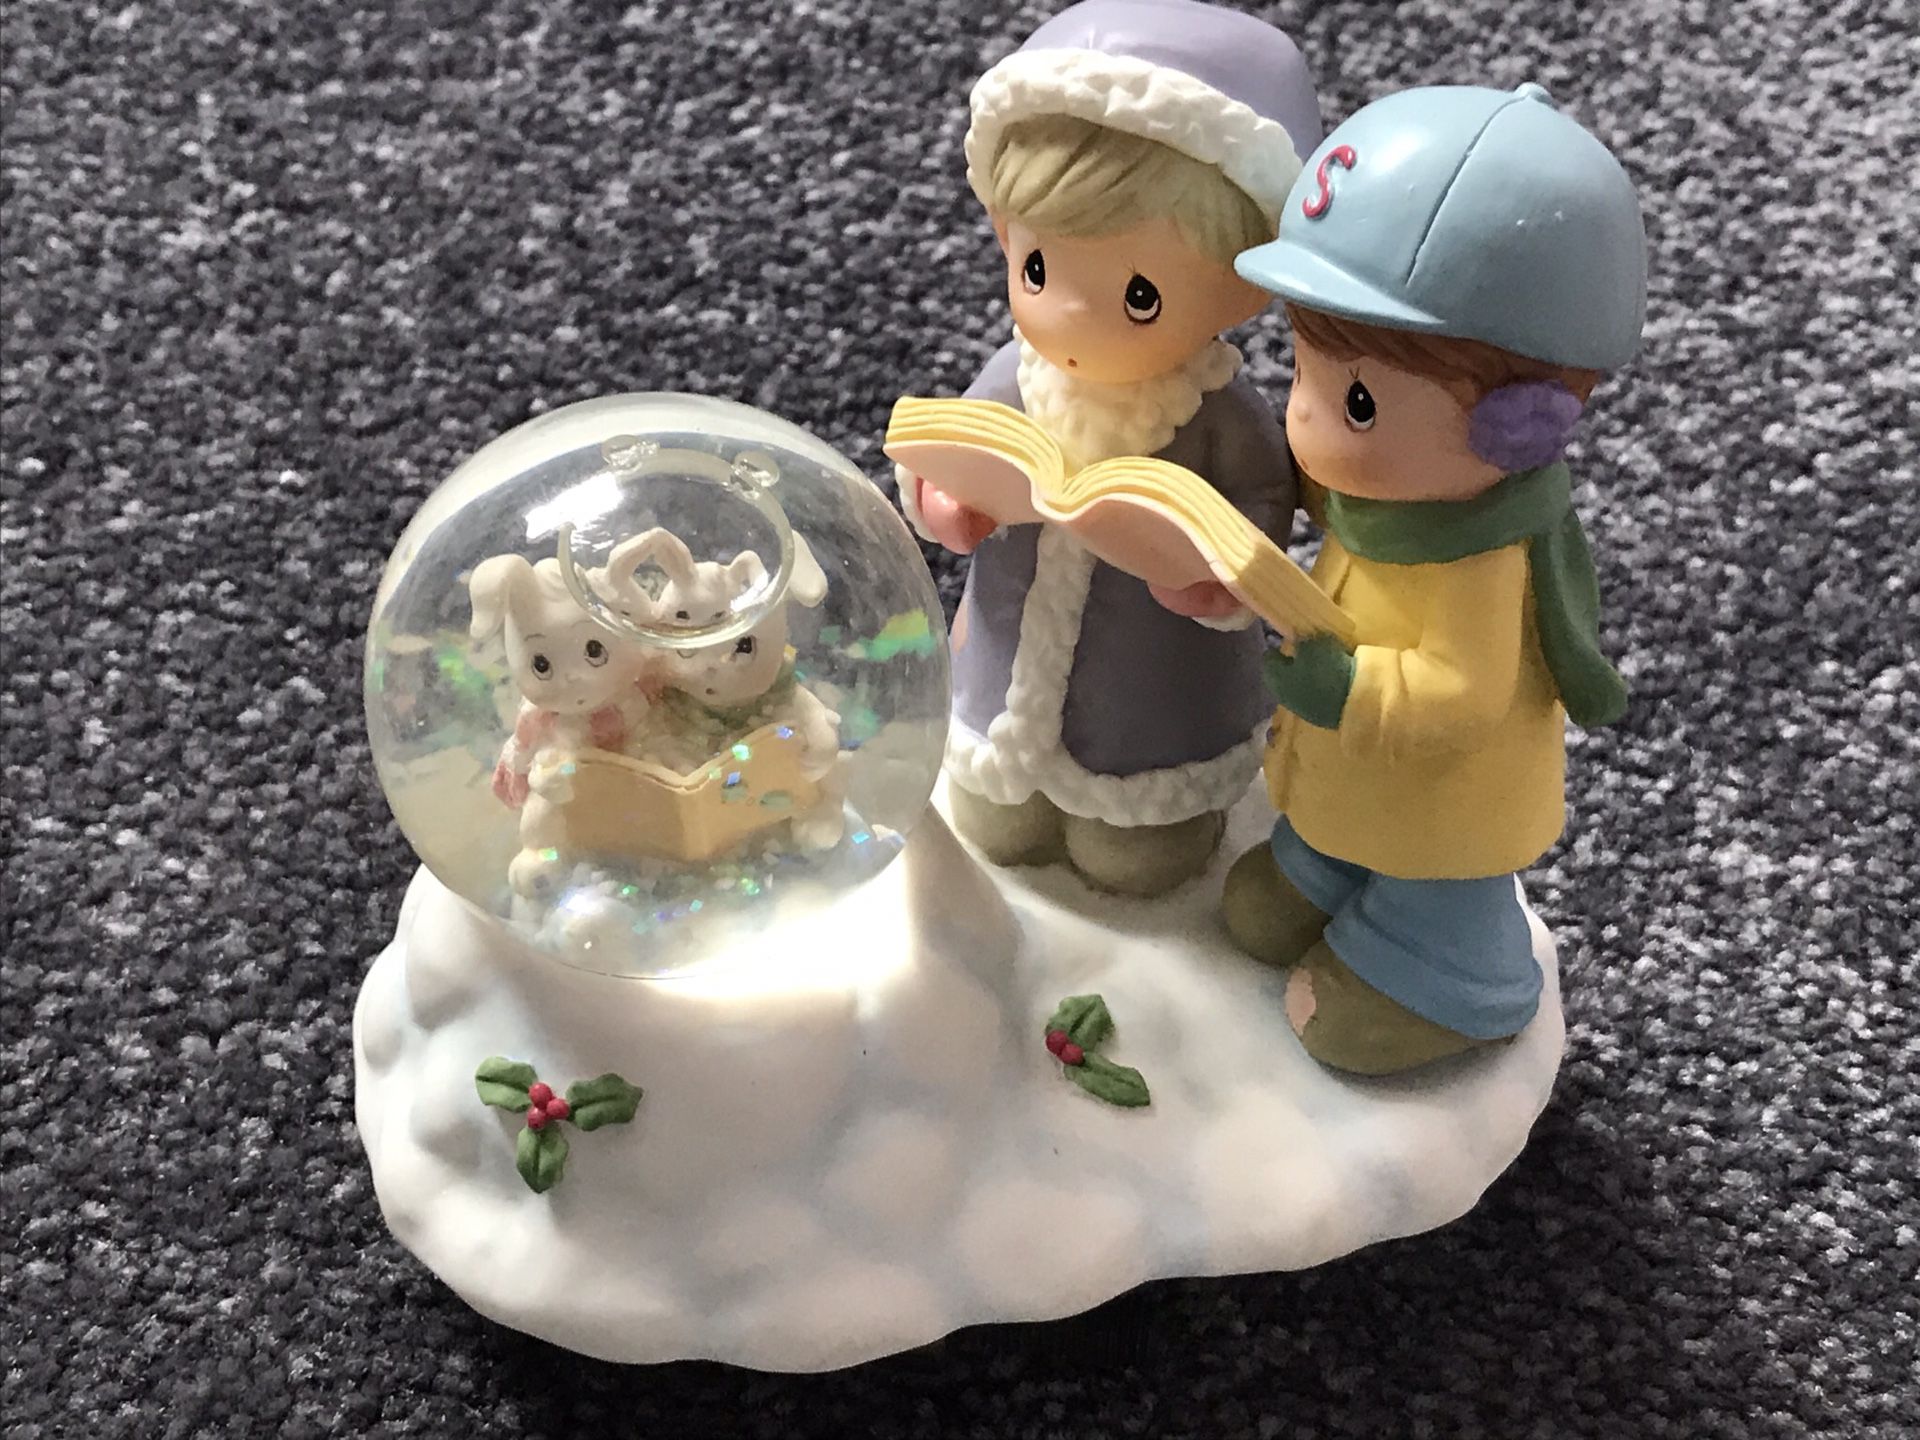 1999 PRECIOUS MOMENTS ENESCO BUNNY CAROLERS IN A SNOW-GLOBE WITH CHILDREN CAROLERS...”FREE SHIPPING”!!!